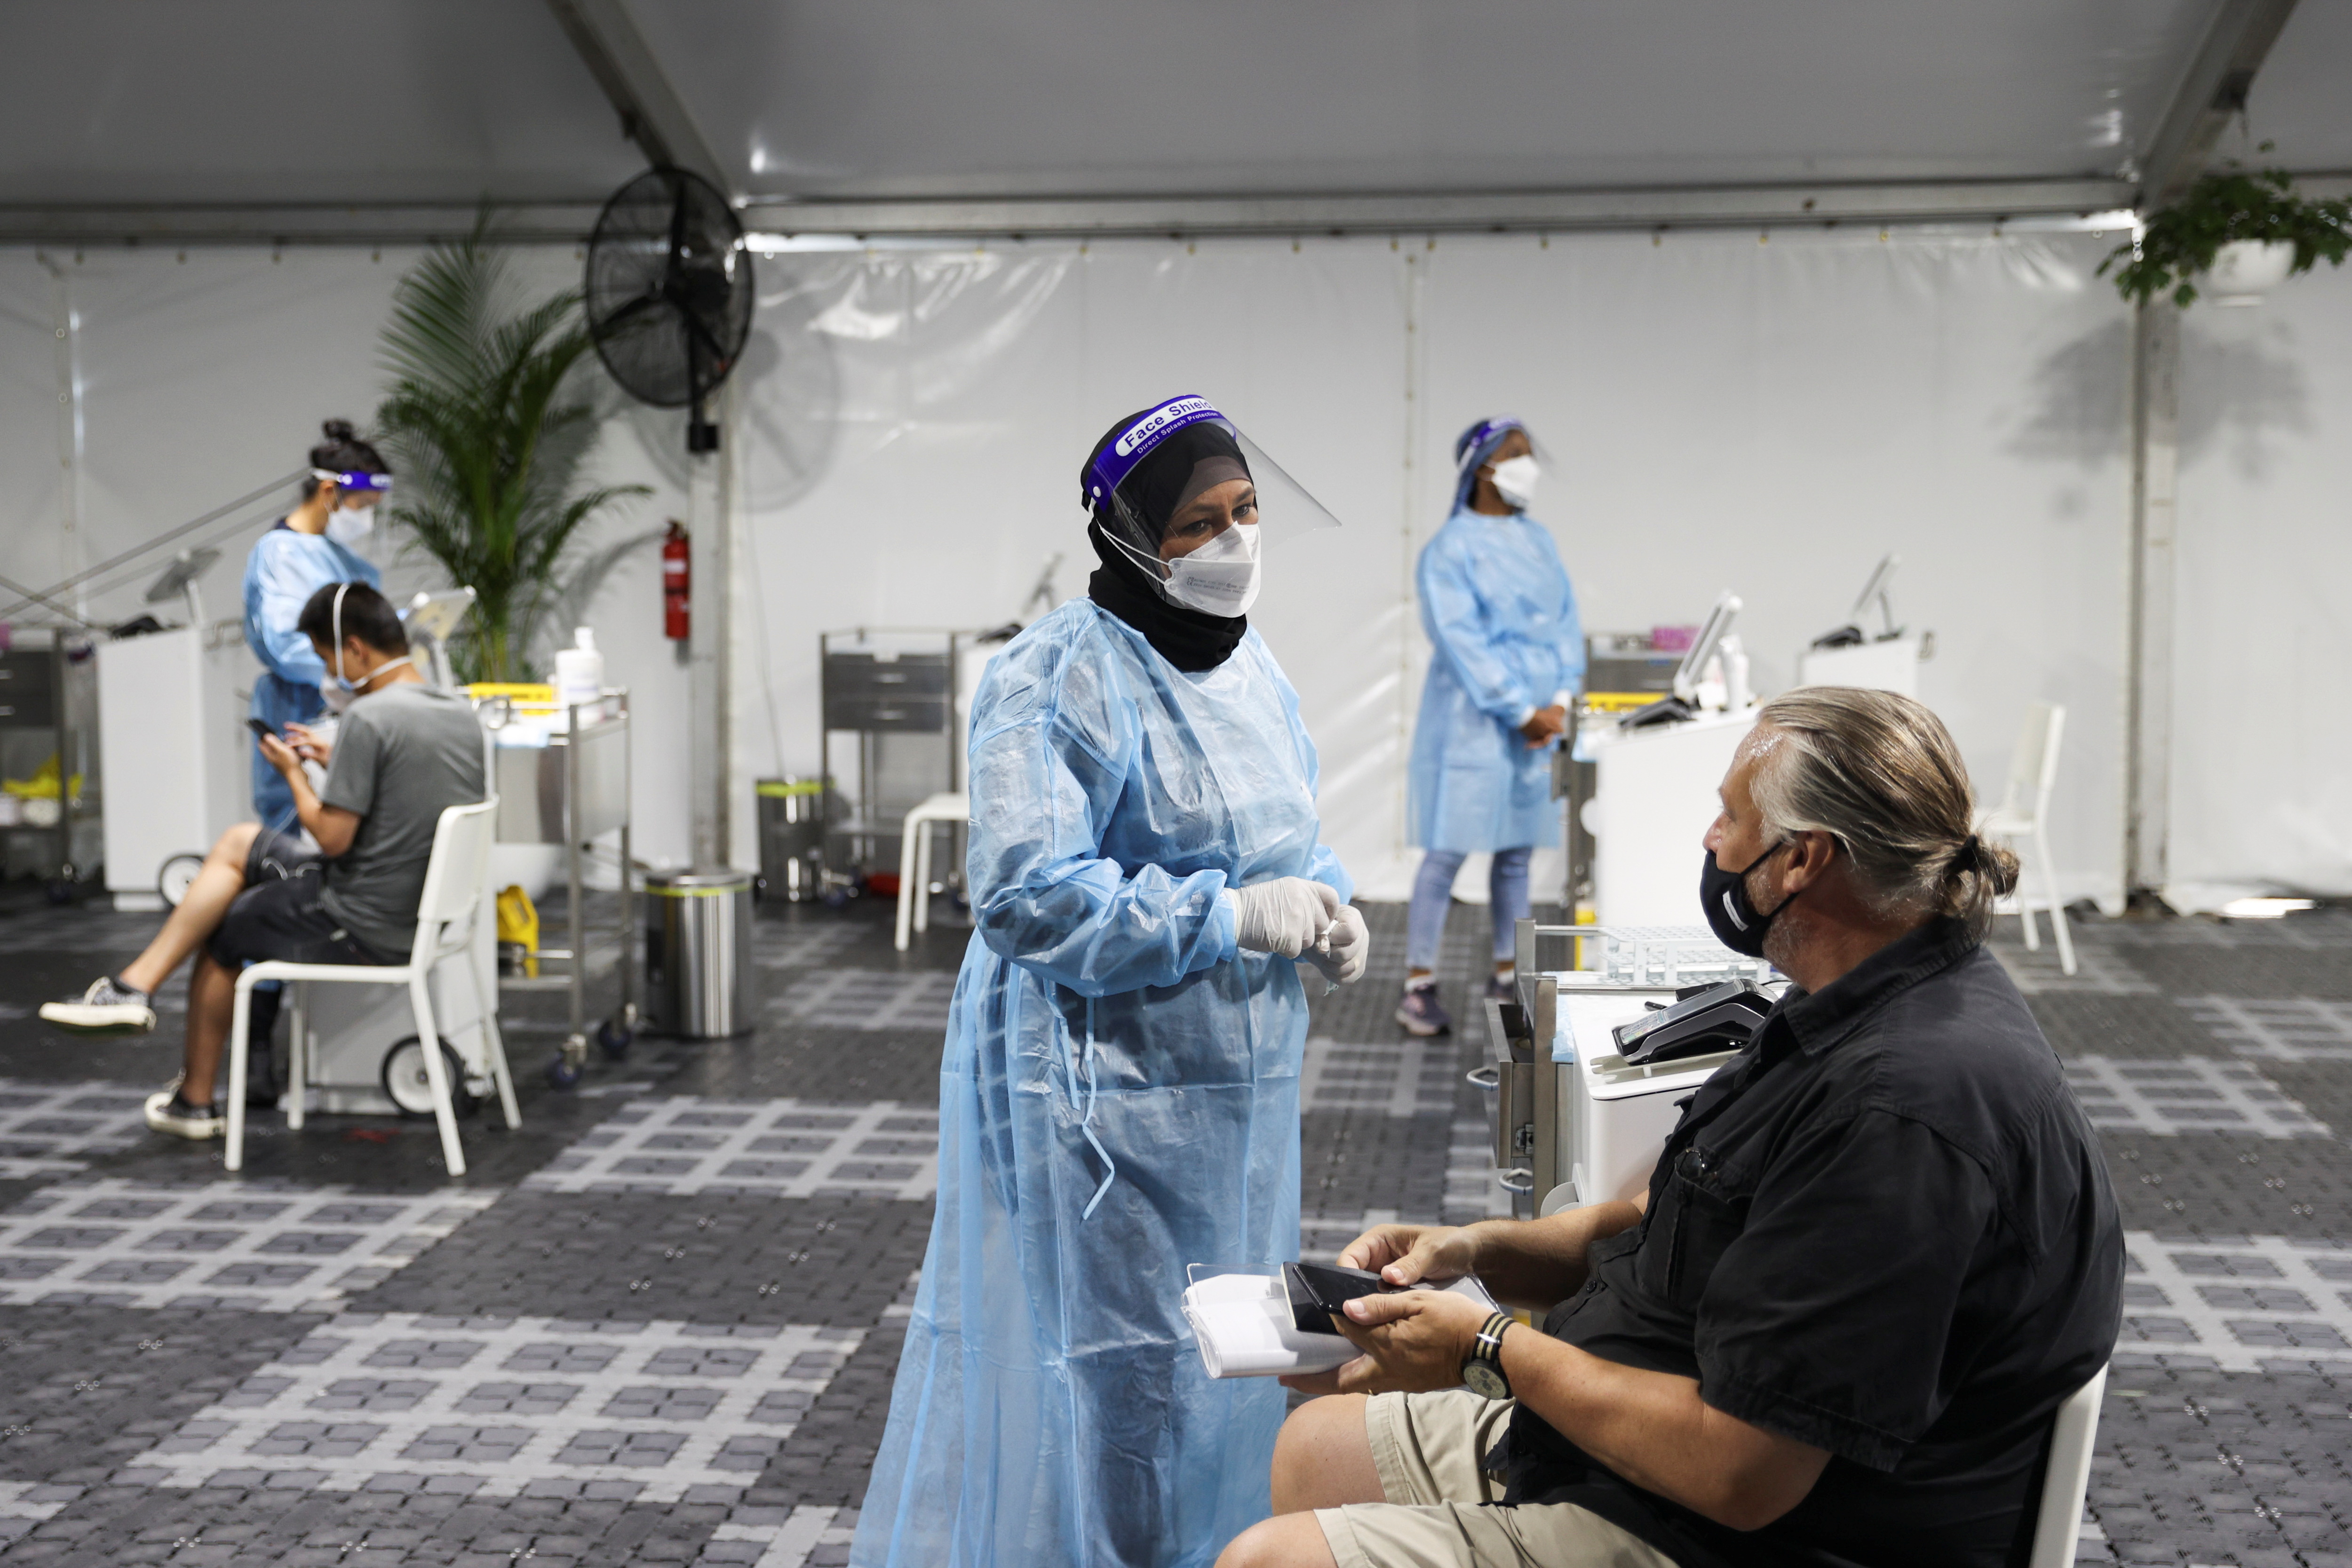 Travellers receive tests for the coronavirus disease (COVID-19) at a pre-departure testing facility, as countries react to the new coronavirus Omicron variant, outside the international terminal at Sydney Airport in Sydney, Australia, November 29, 2021.  REUTERS/Loren Elliott